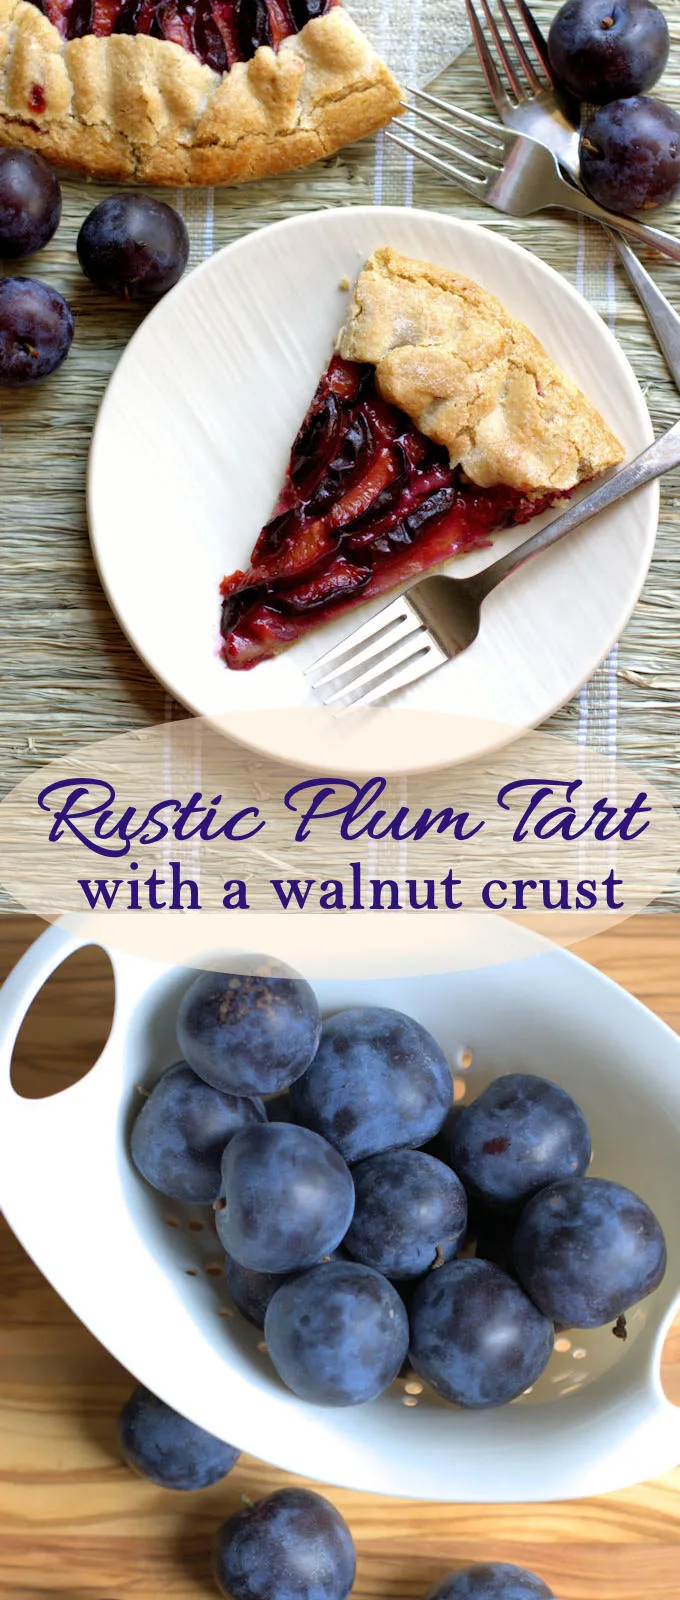 Perfectly simple and perfectly tasty rustic tart made with fresh plums. Easy and fast dessert recipe.